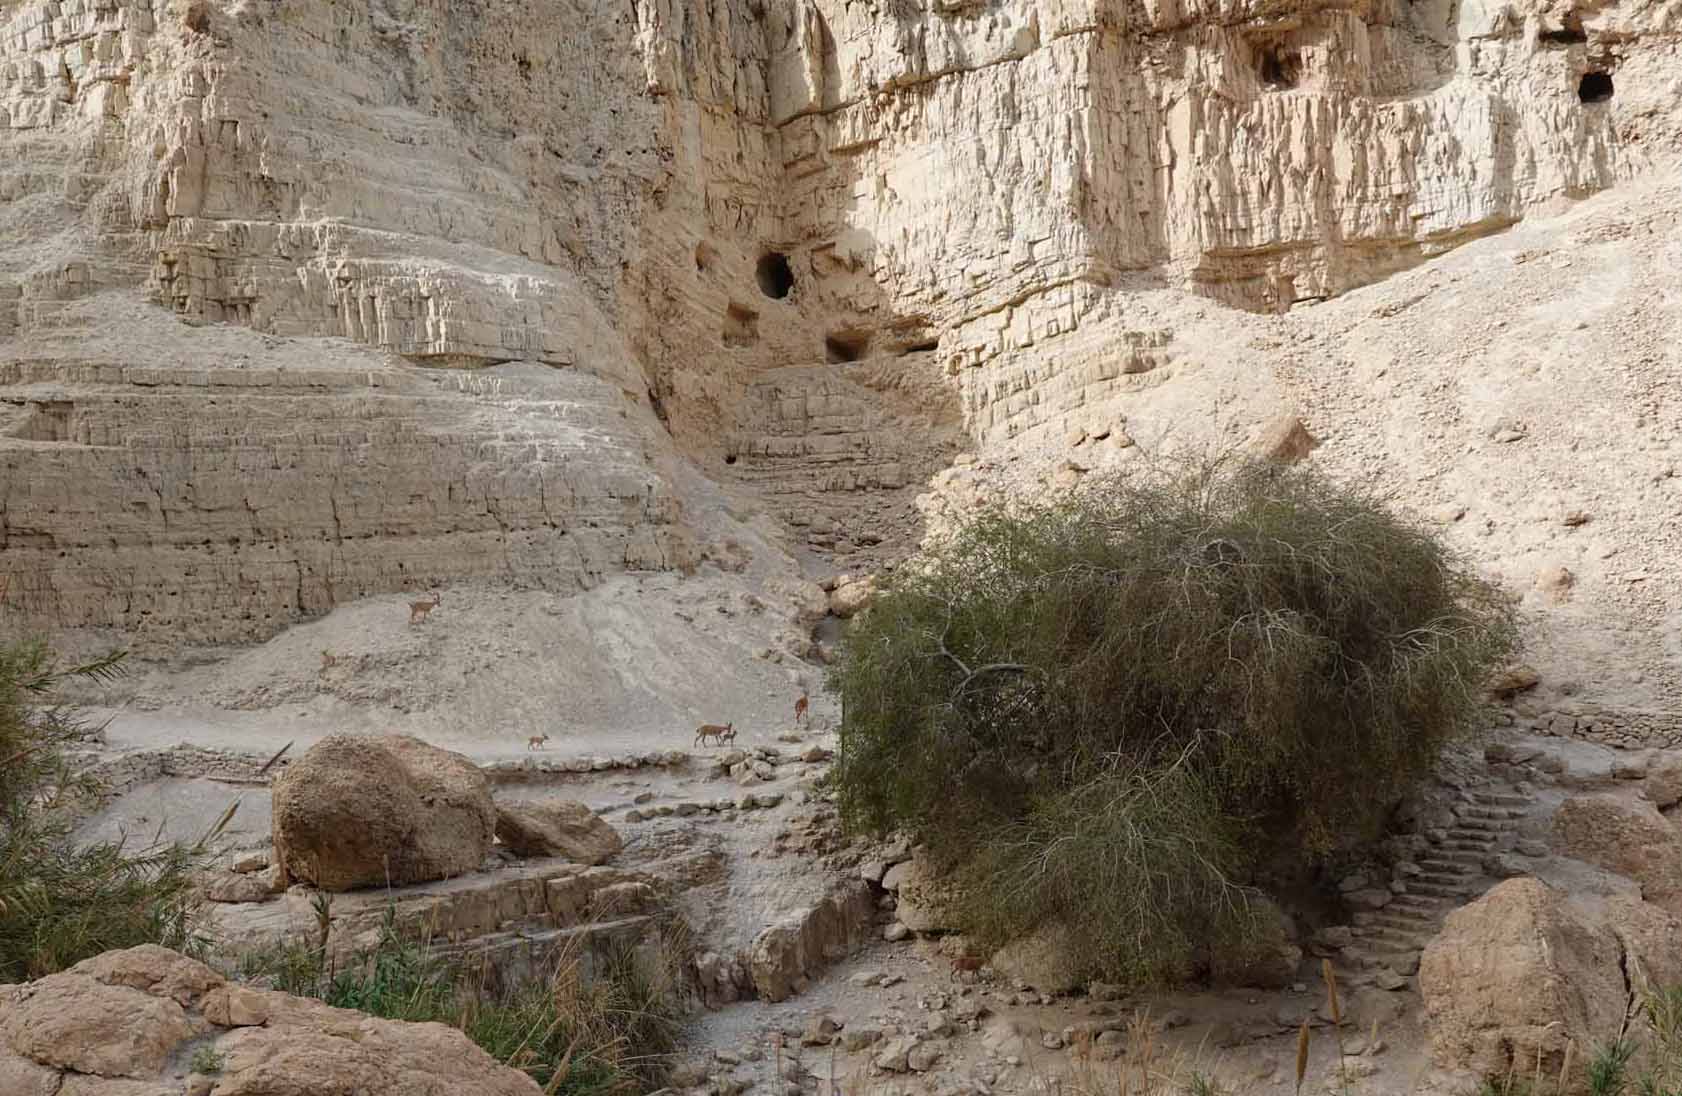 Ibex and Caves of the Ein Gedi Nature Reserve